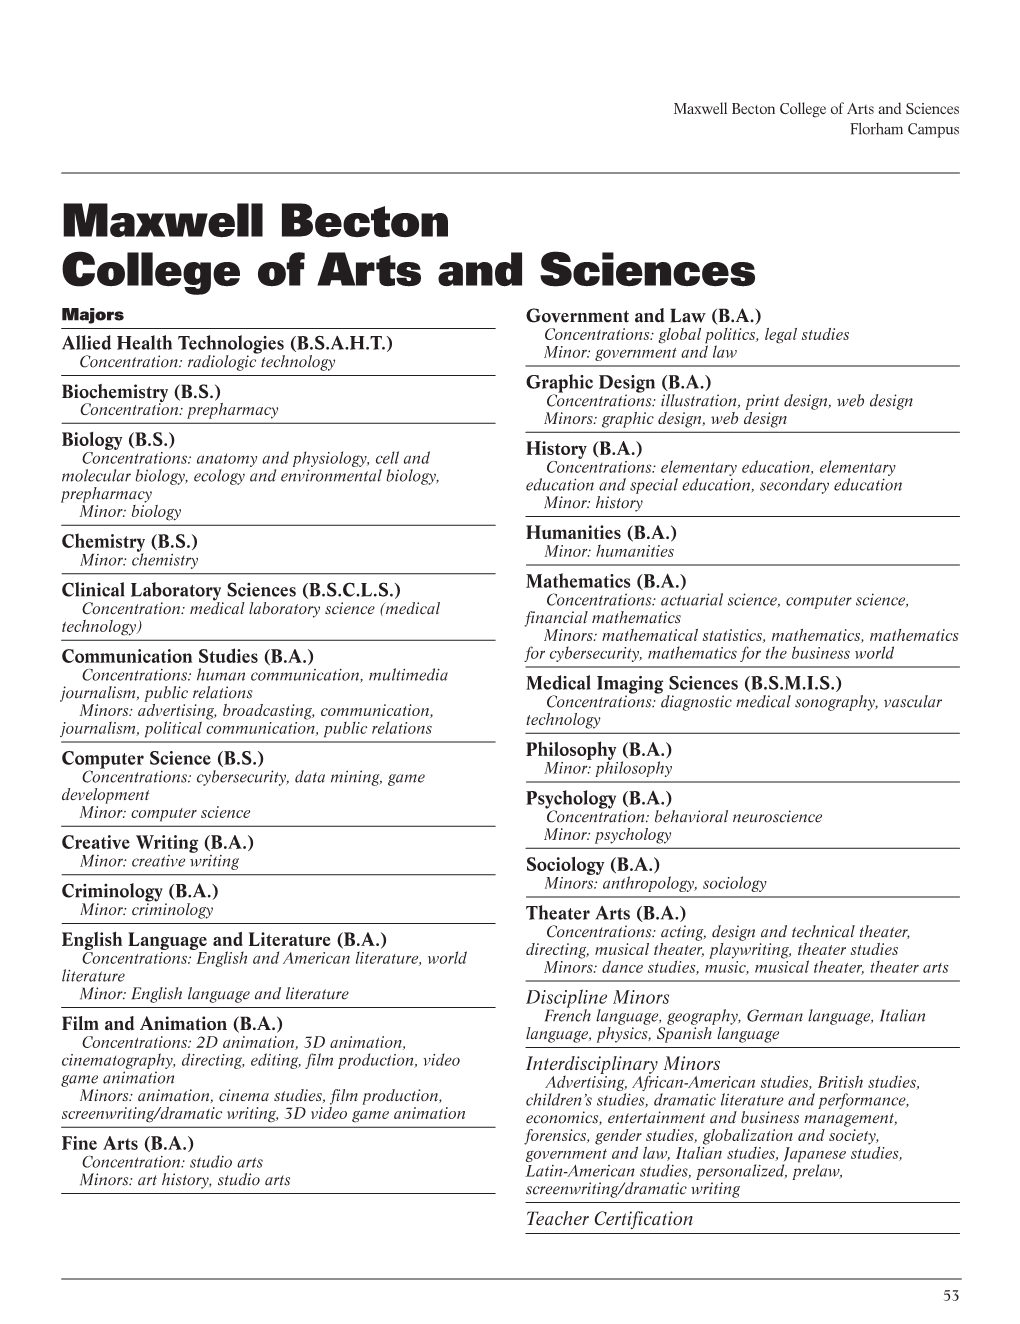 Maxwell Becton College of Arts and Sciences Florham Campus